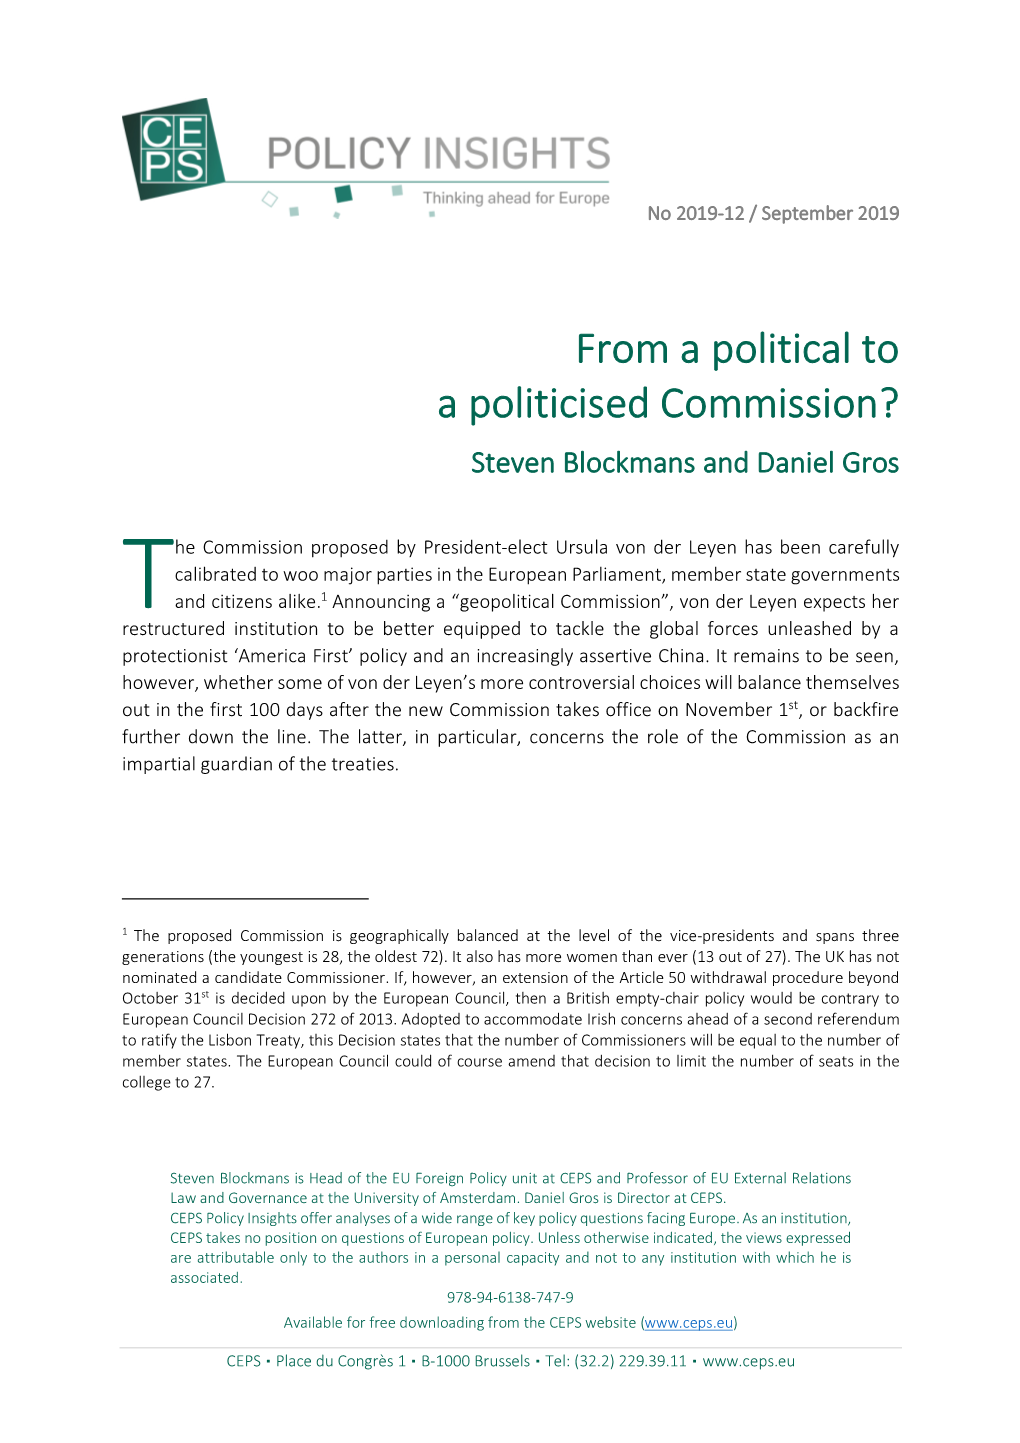 From a Political to a Politicised Commission? Steven Blockmans and Daniel Gros